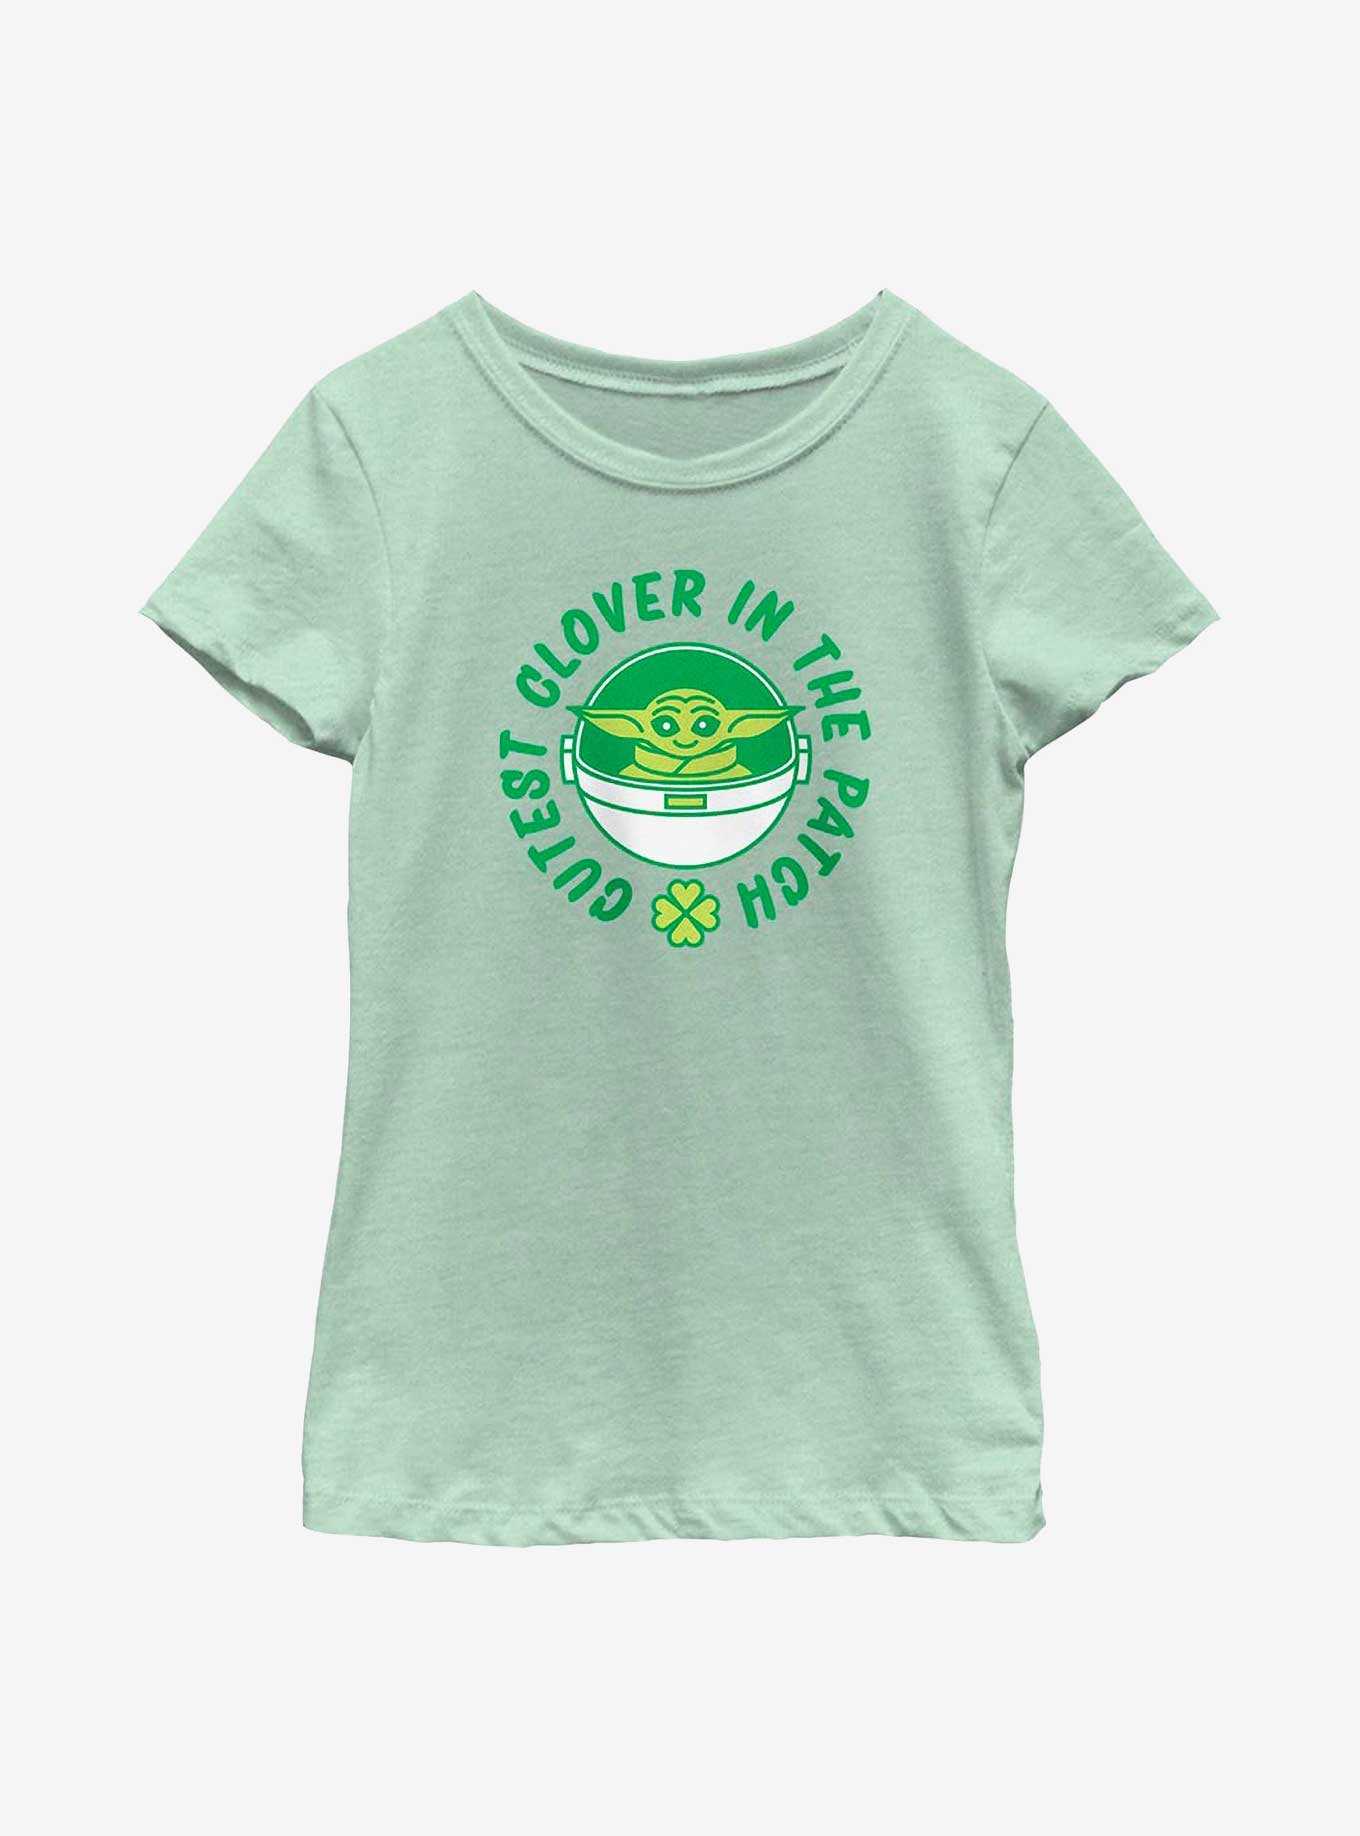 Star Wars The Mandalorian Clover Patch Youth Girls T-Shirt, , hi-res